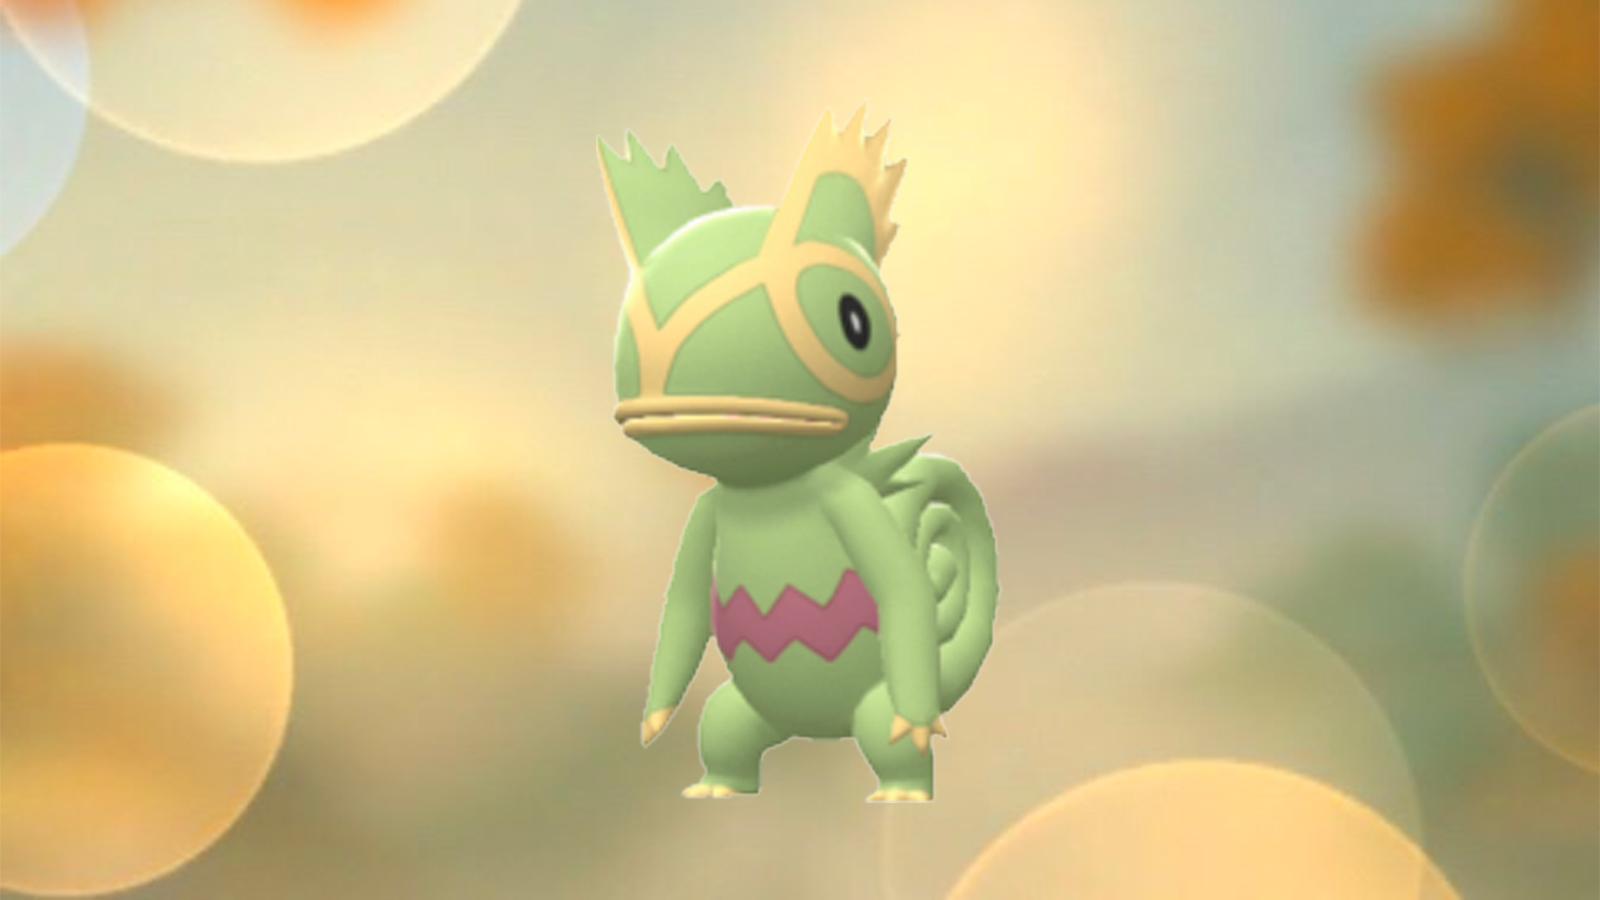 Kecleon available in Pokémon Go for the first time following Chespin  Community Day